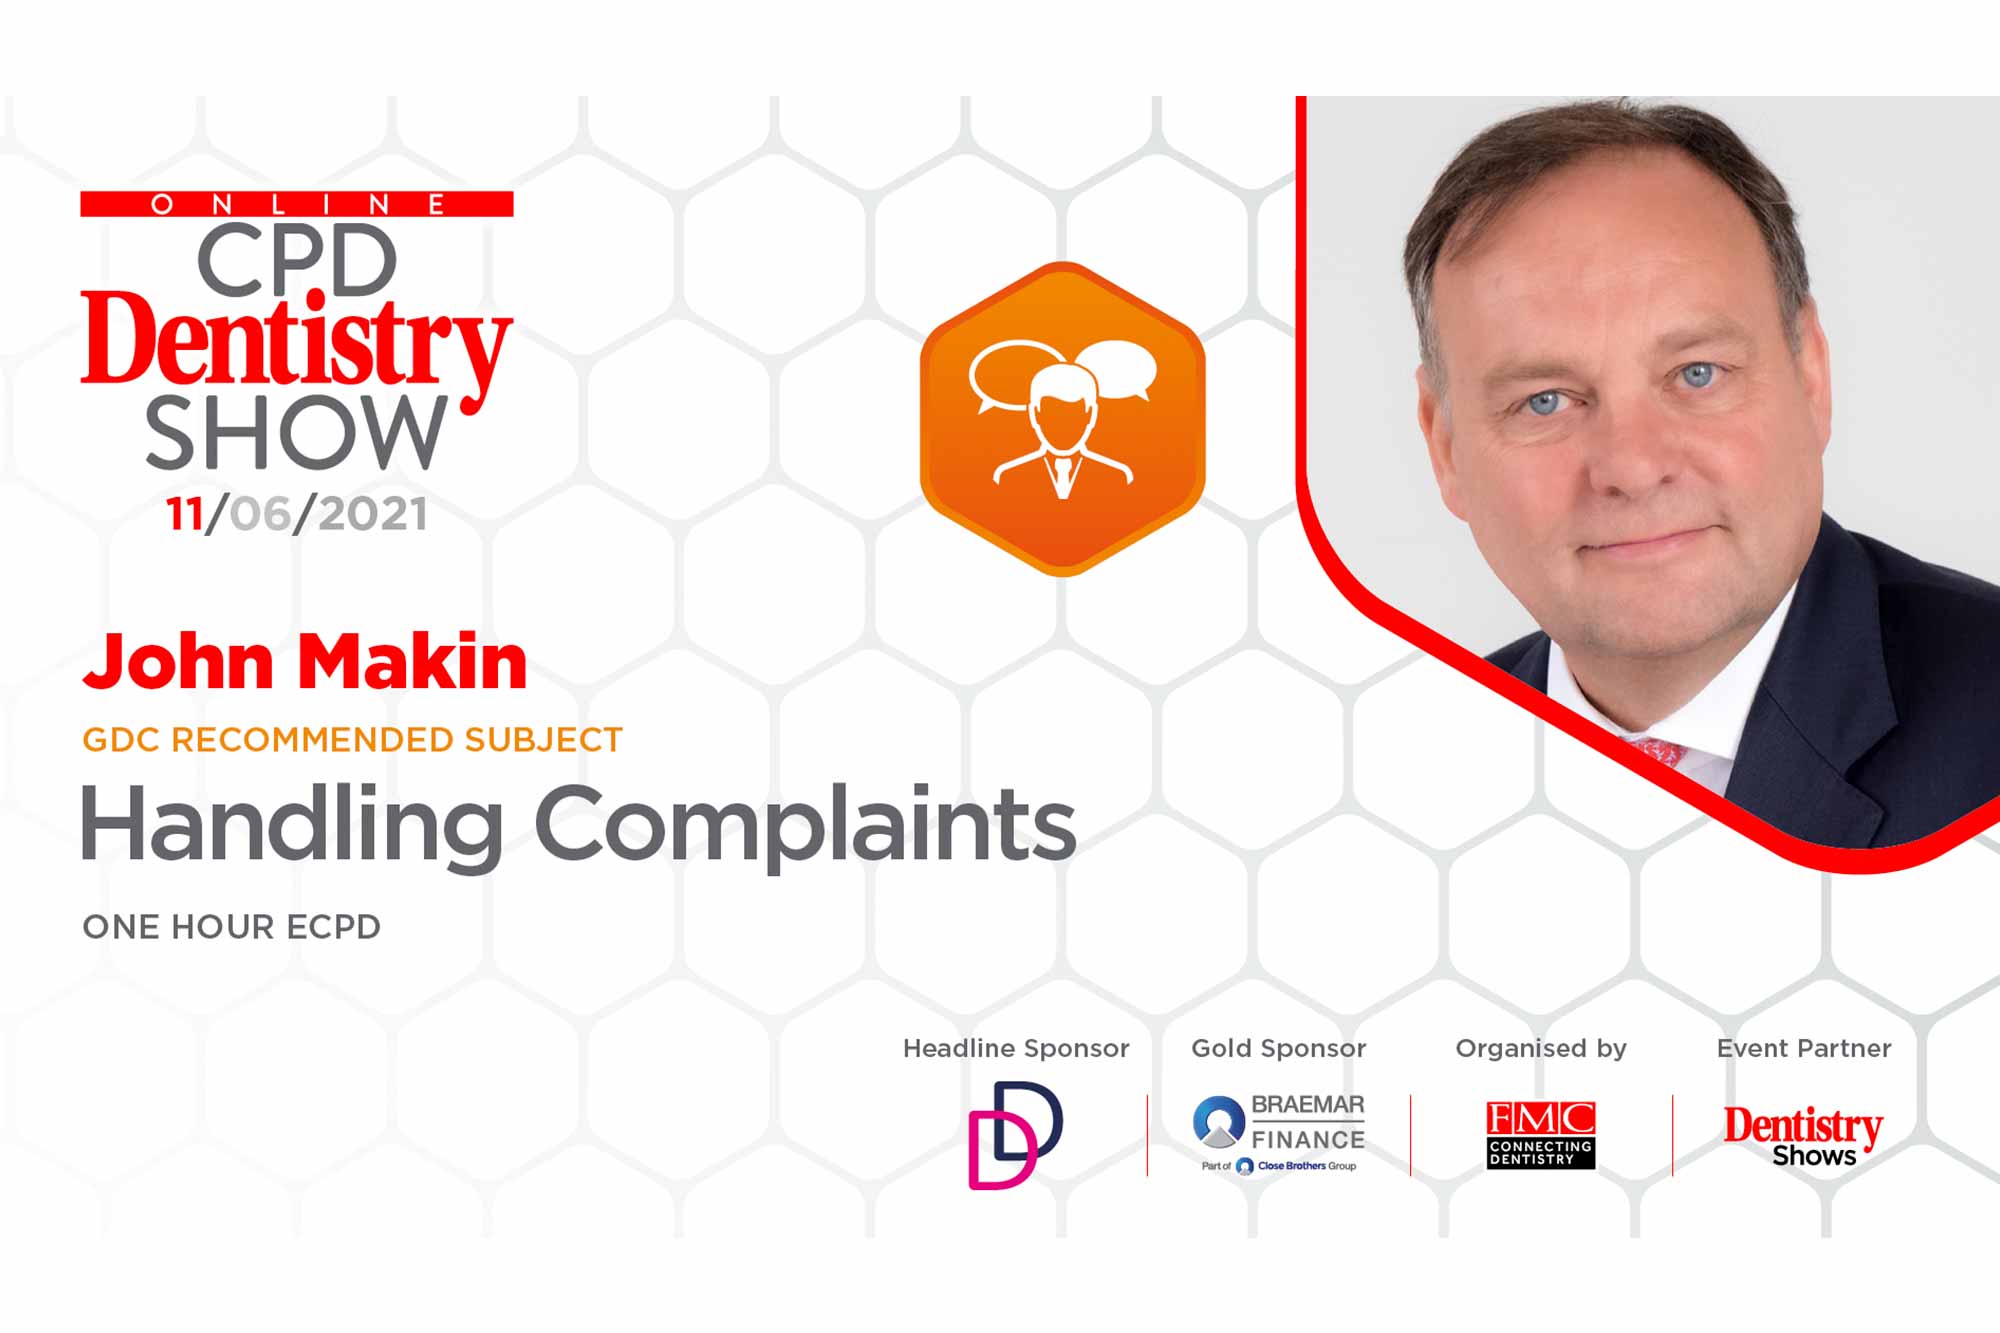 John Makin will lecture on complaint handling at this week's Online CPD Dentistry Show